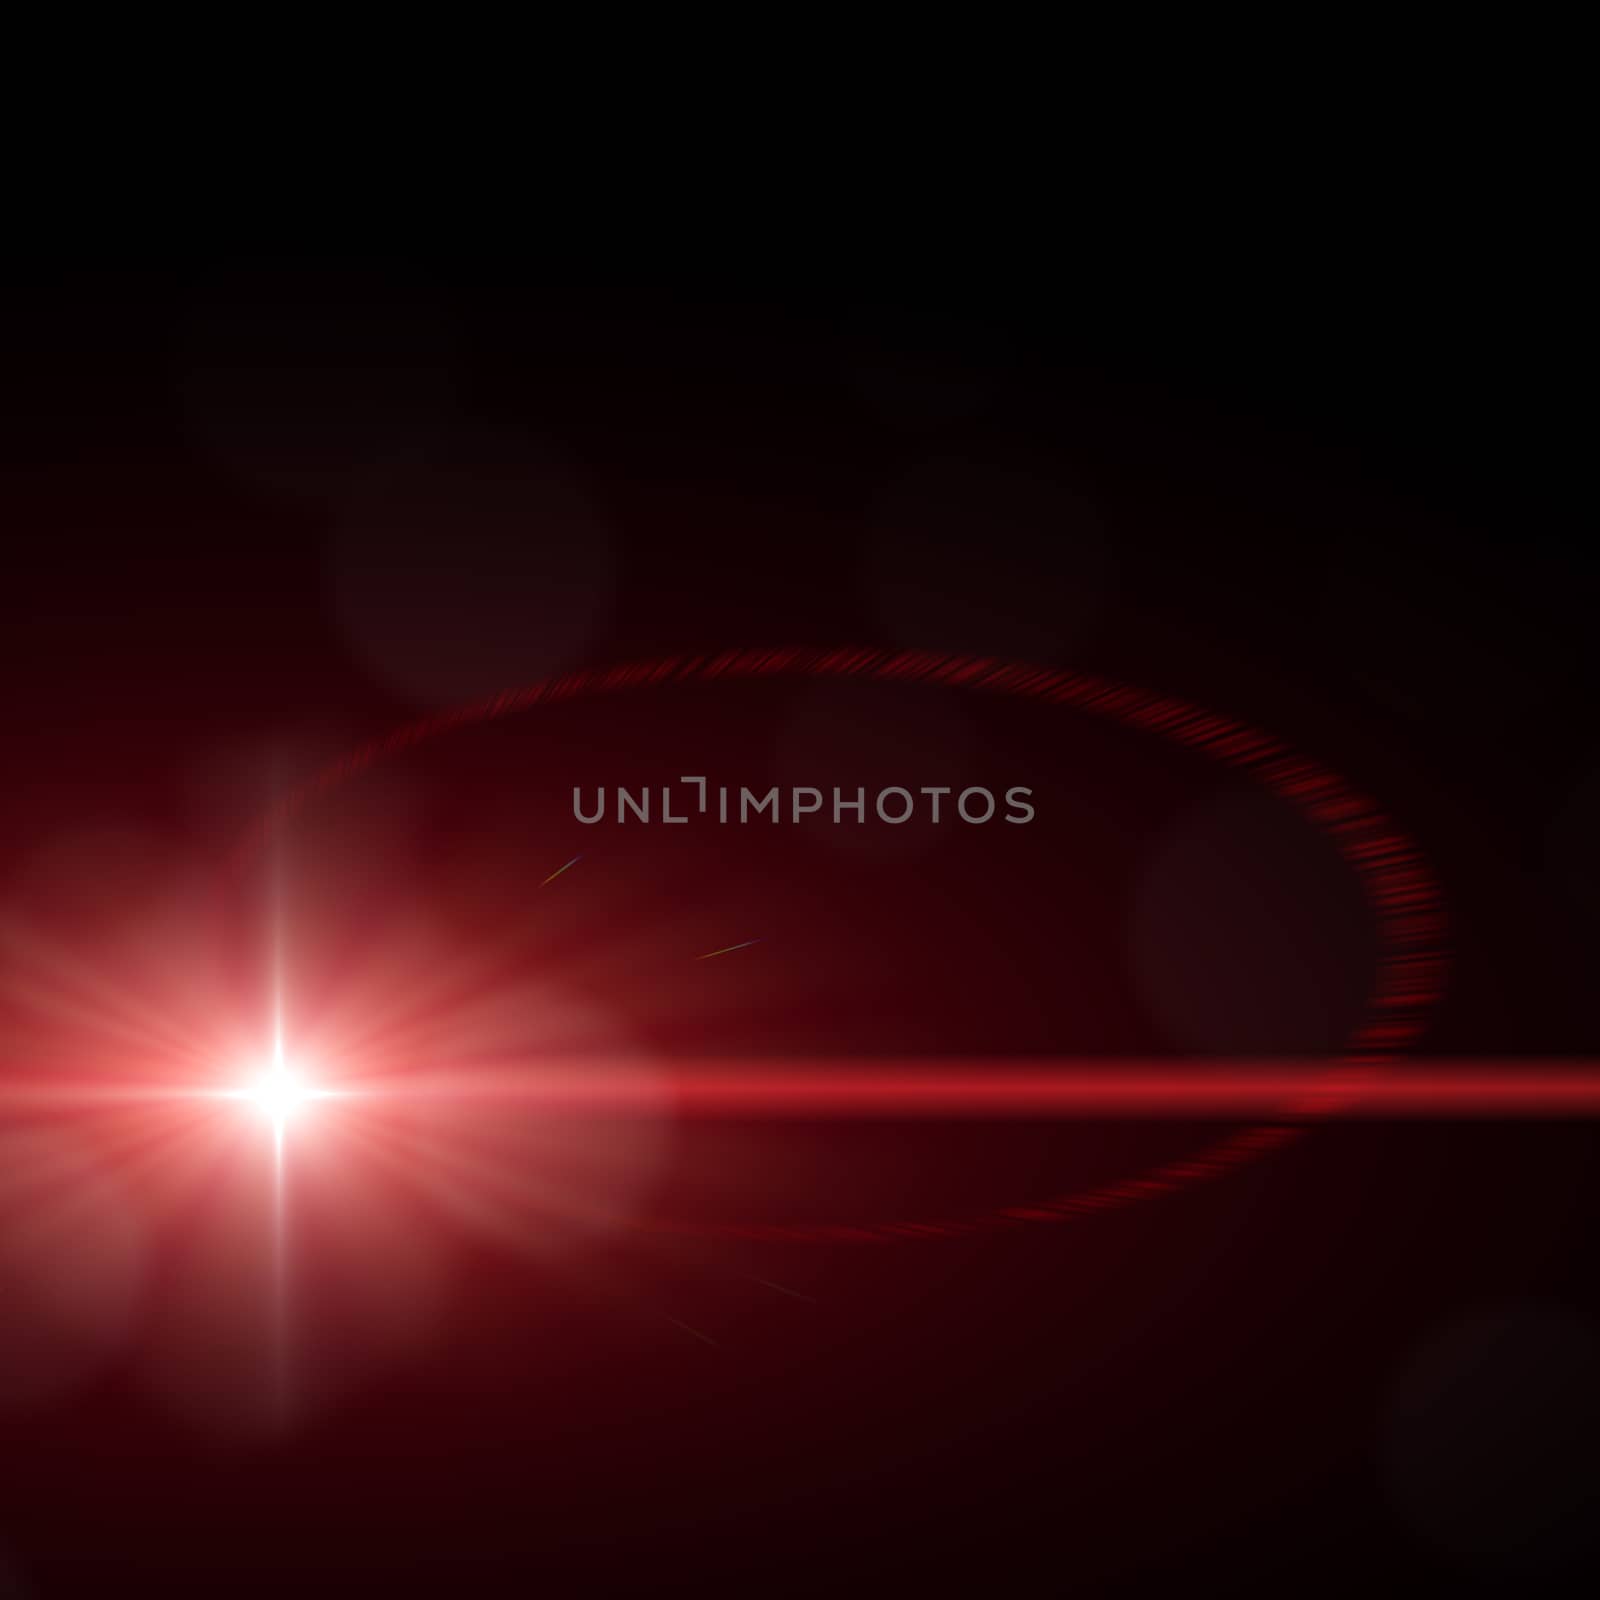 An image of a decorative red lens flare background